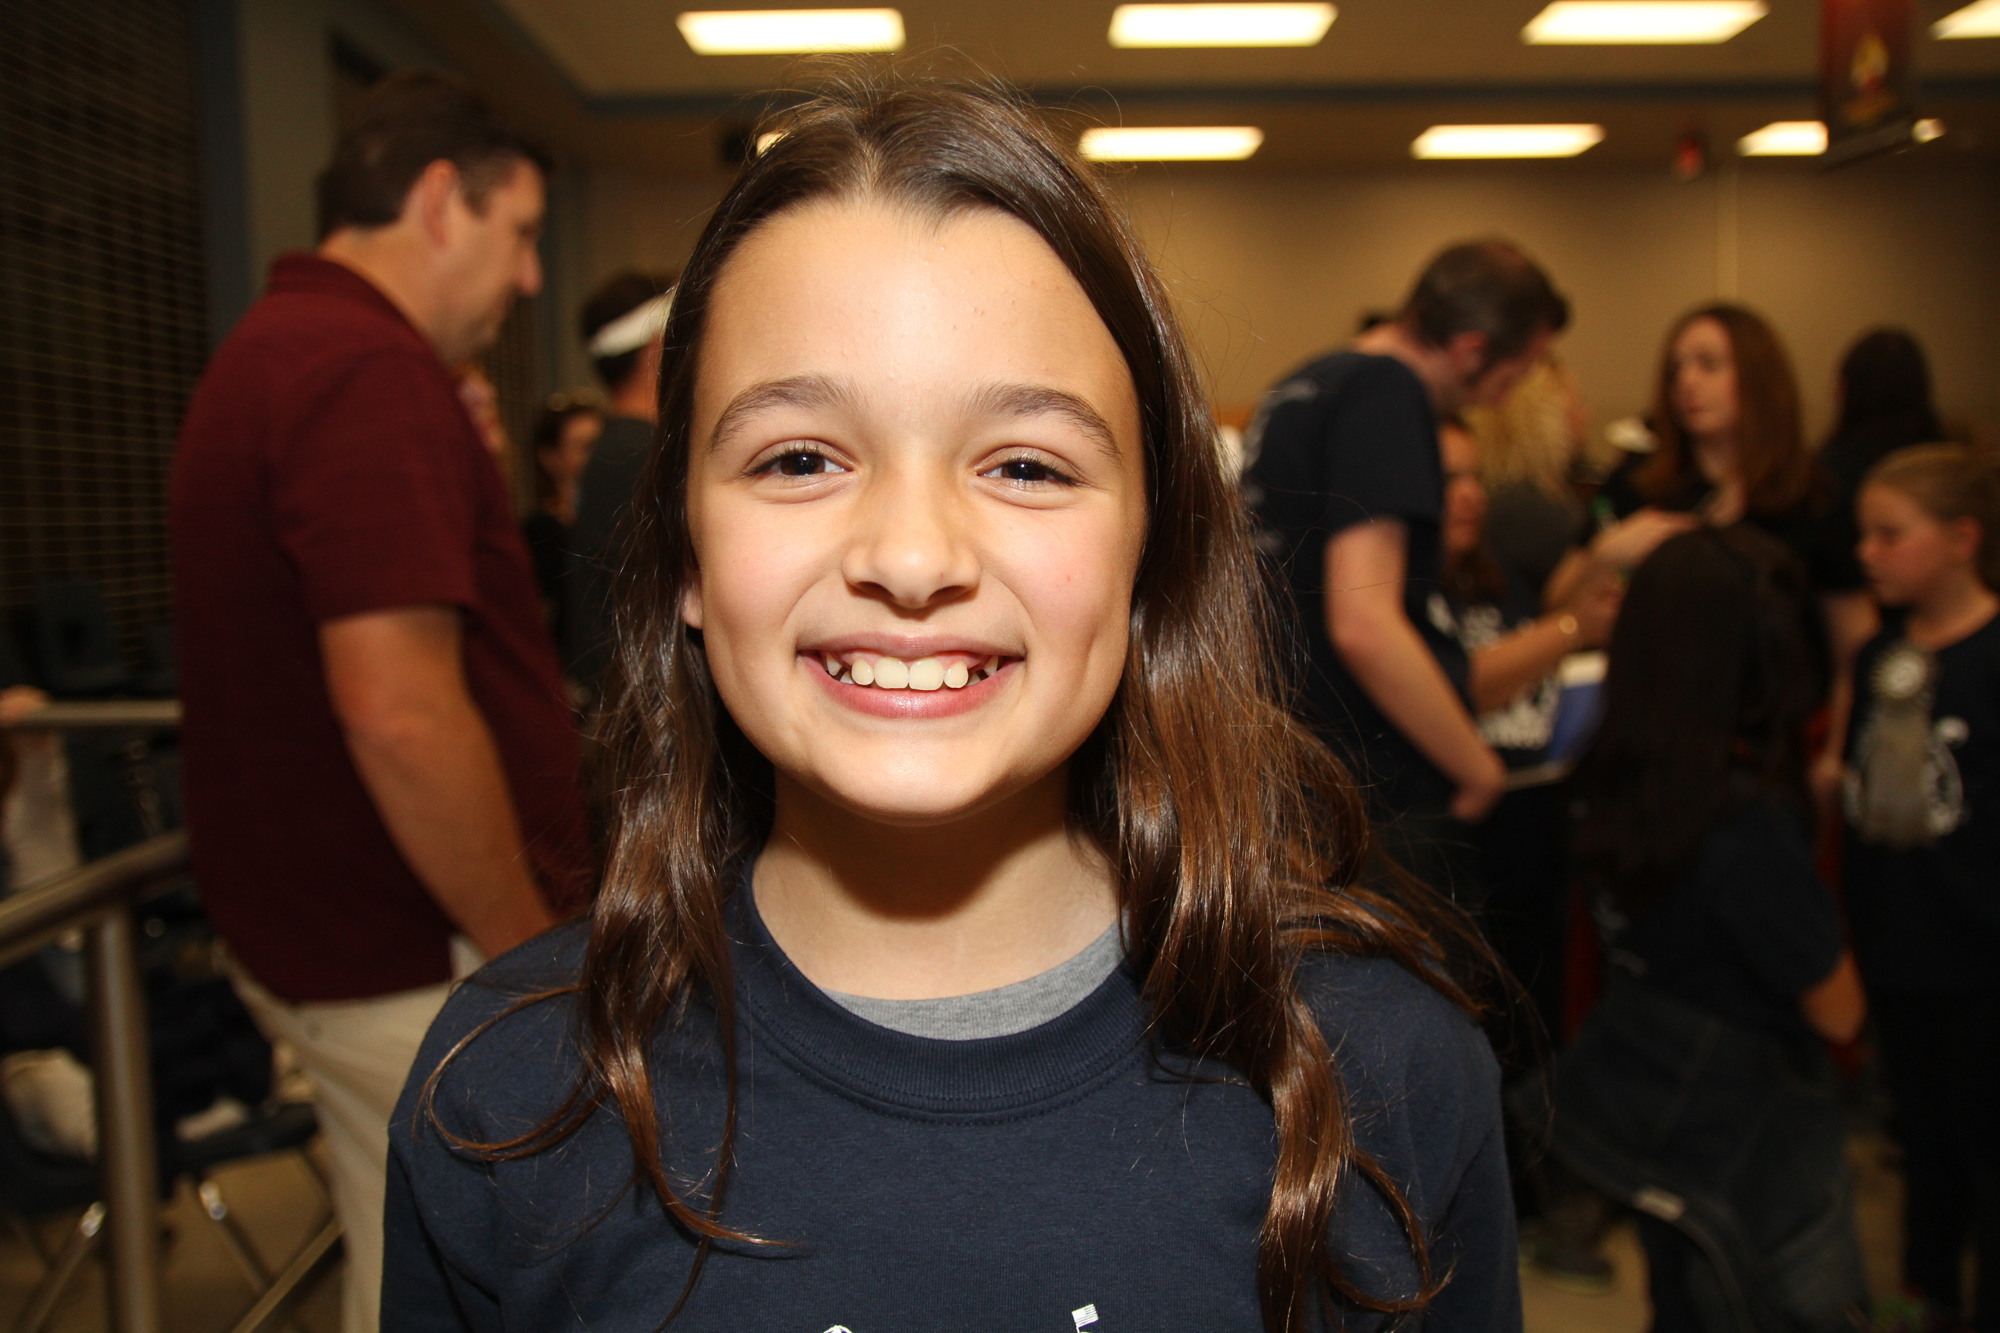 Windy Ridge School fifth-grader Addison Stump lost a tooth the day of the competition.